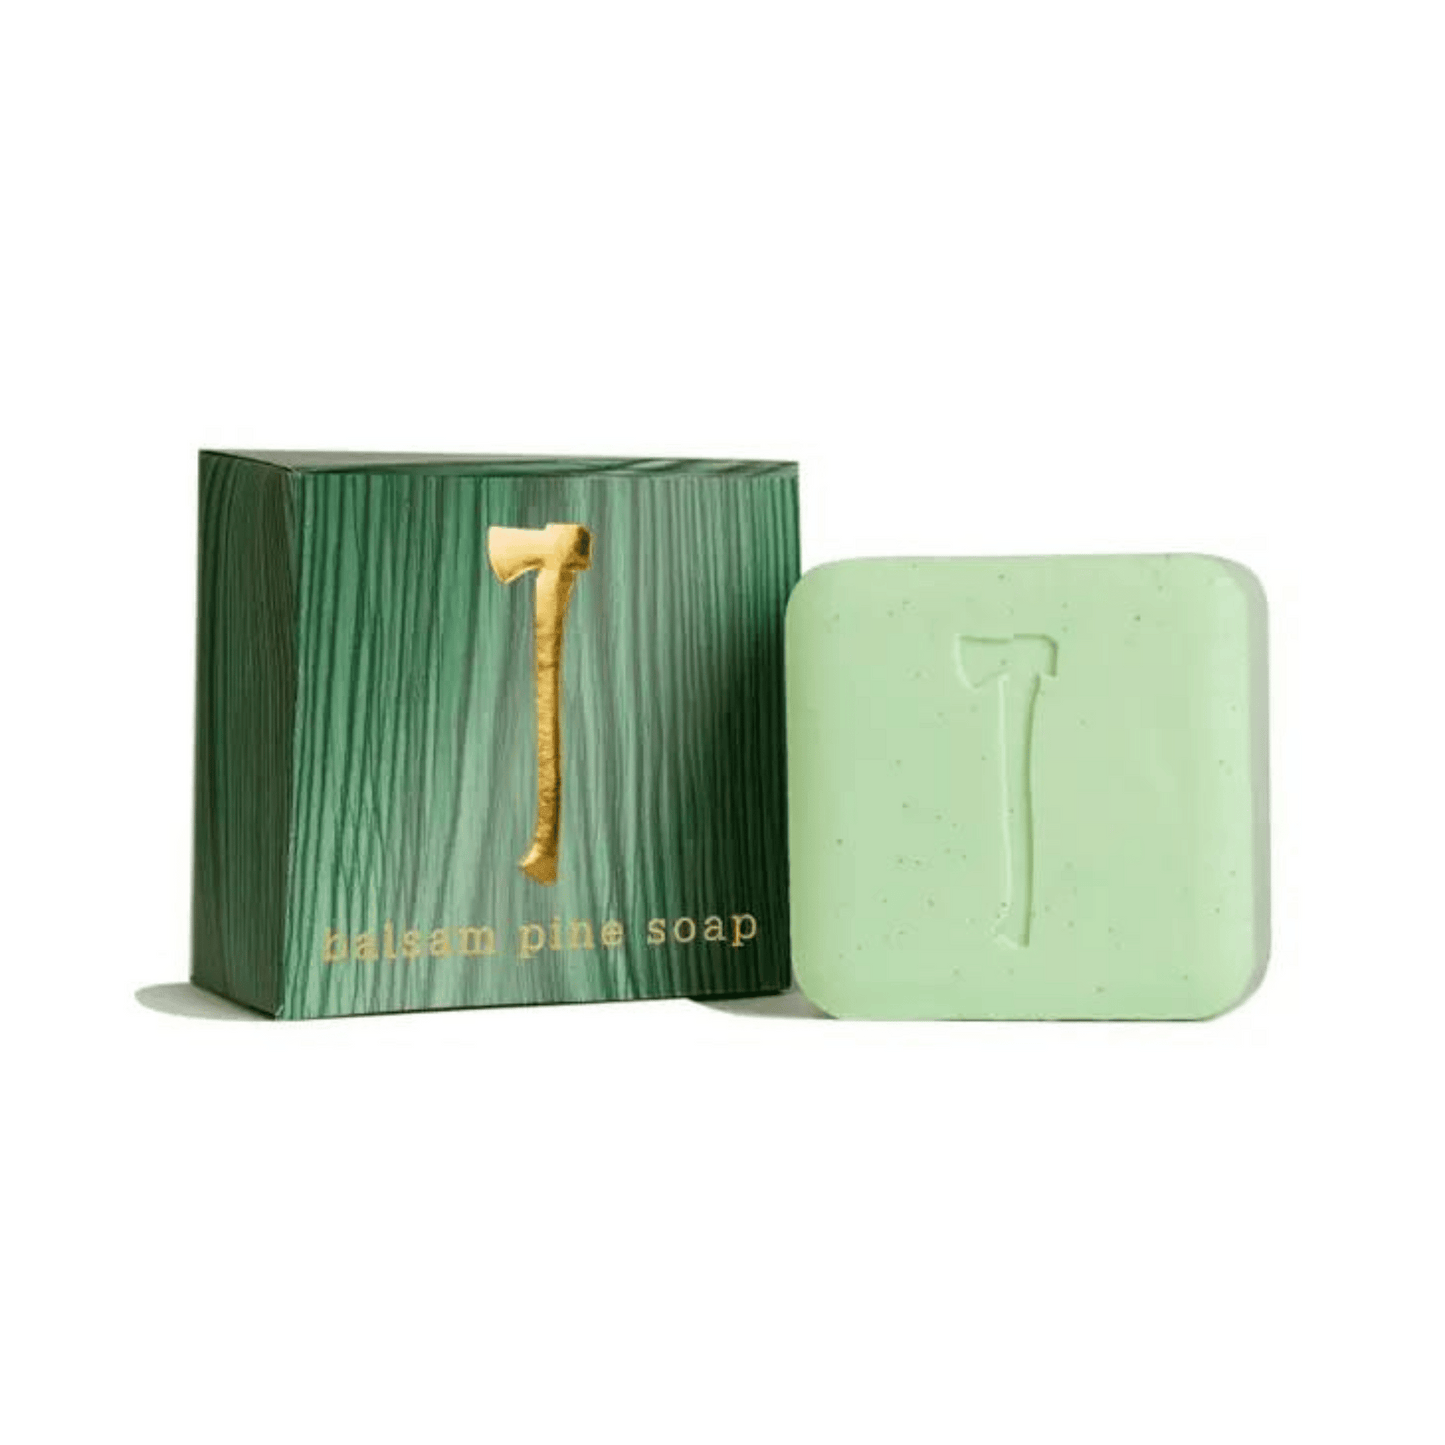 Primary Image of Balsam Pine Bar Soap